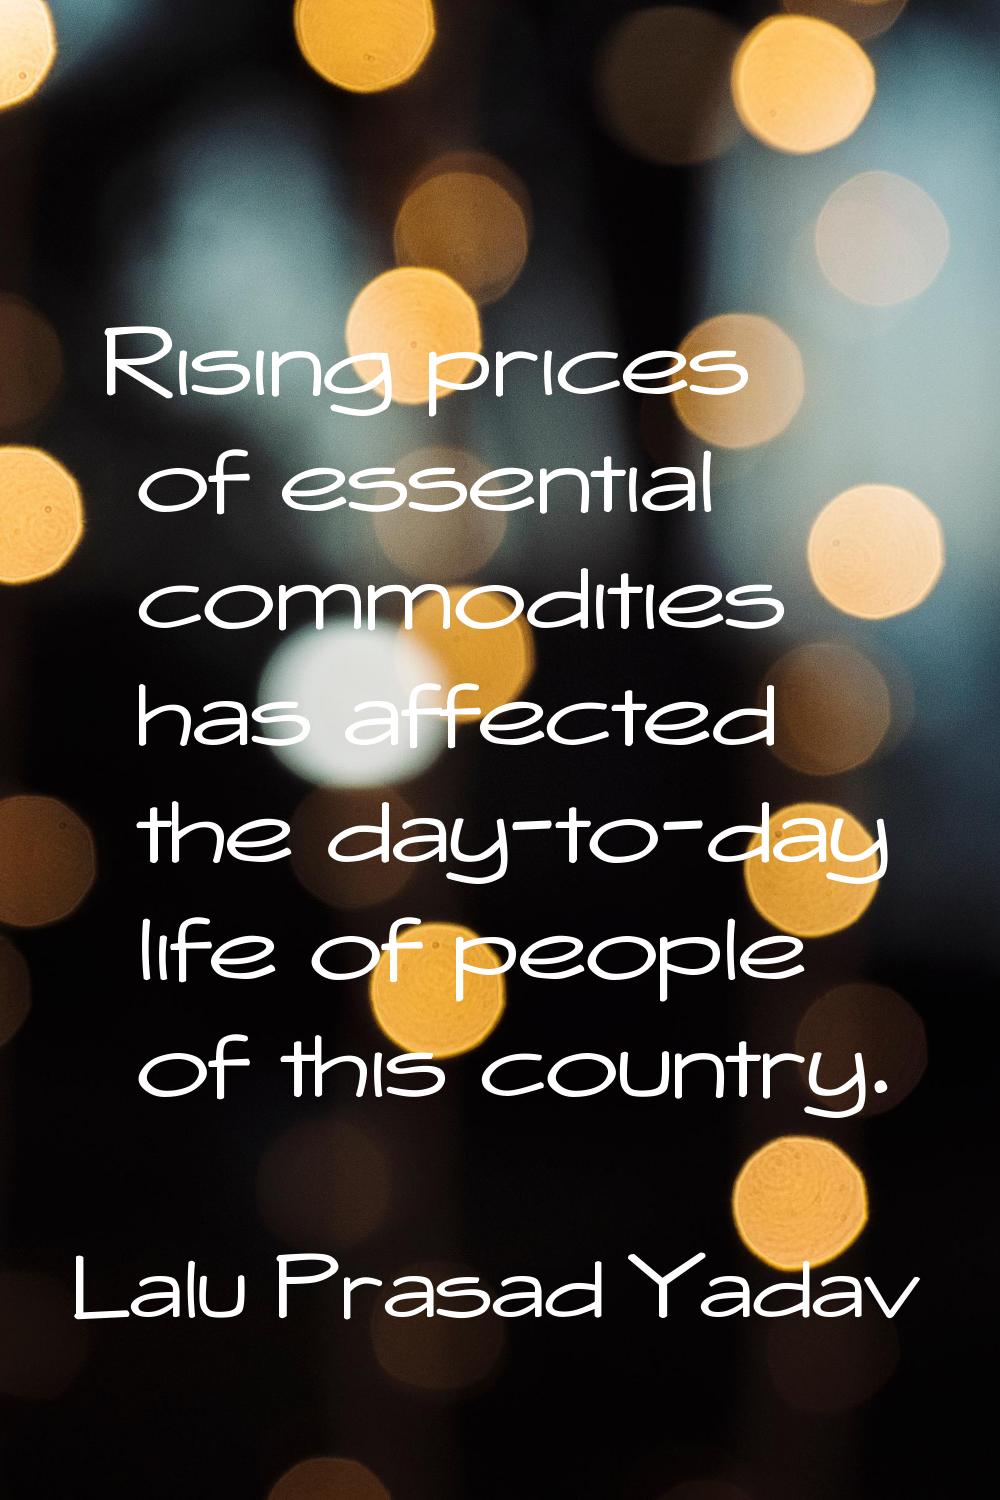 Rising prices of essential commodities has affected the day-to-day life of people of this country.